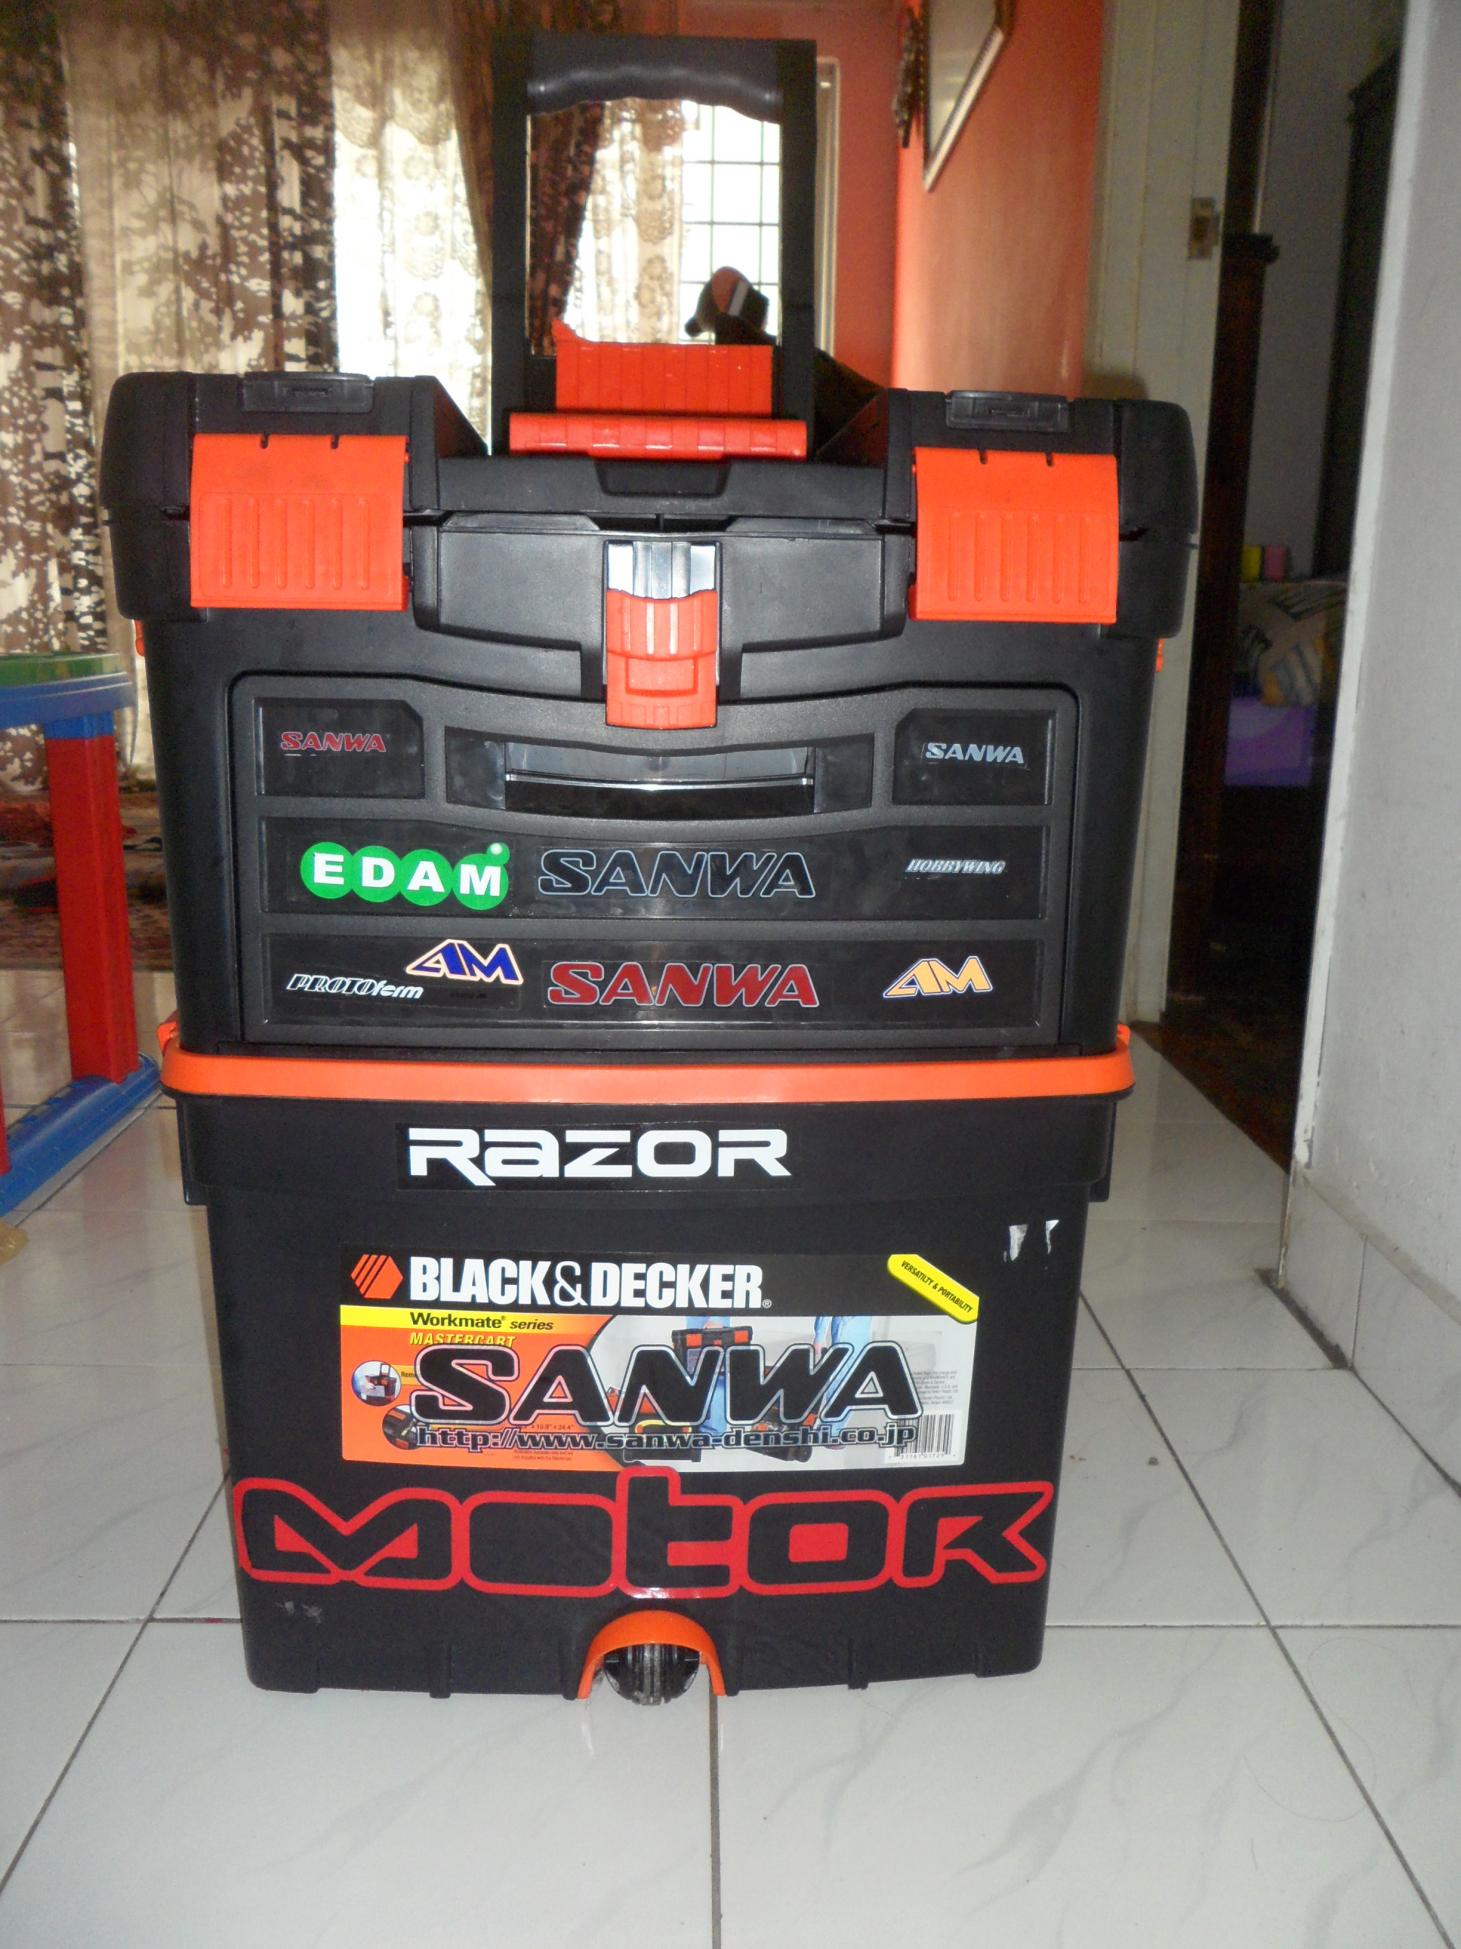 BLACK DECKER RC TOOL BOX WITH WHEELS - FOR SALE - R/C Tech Forums